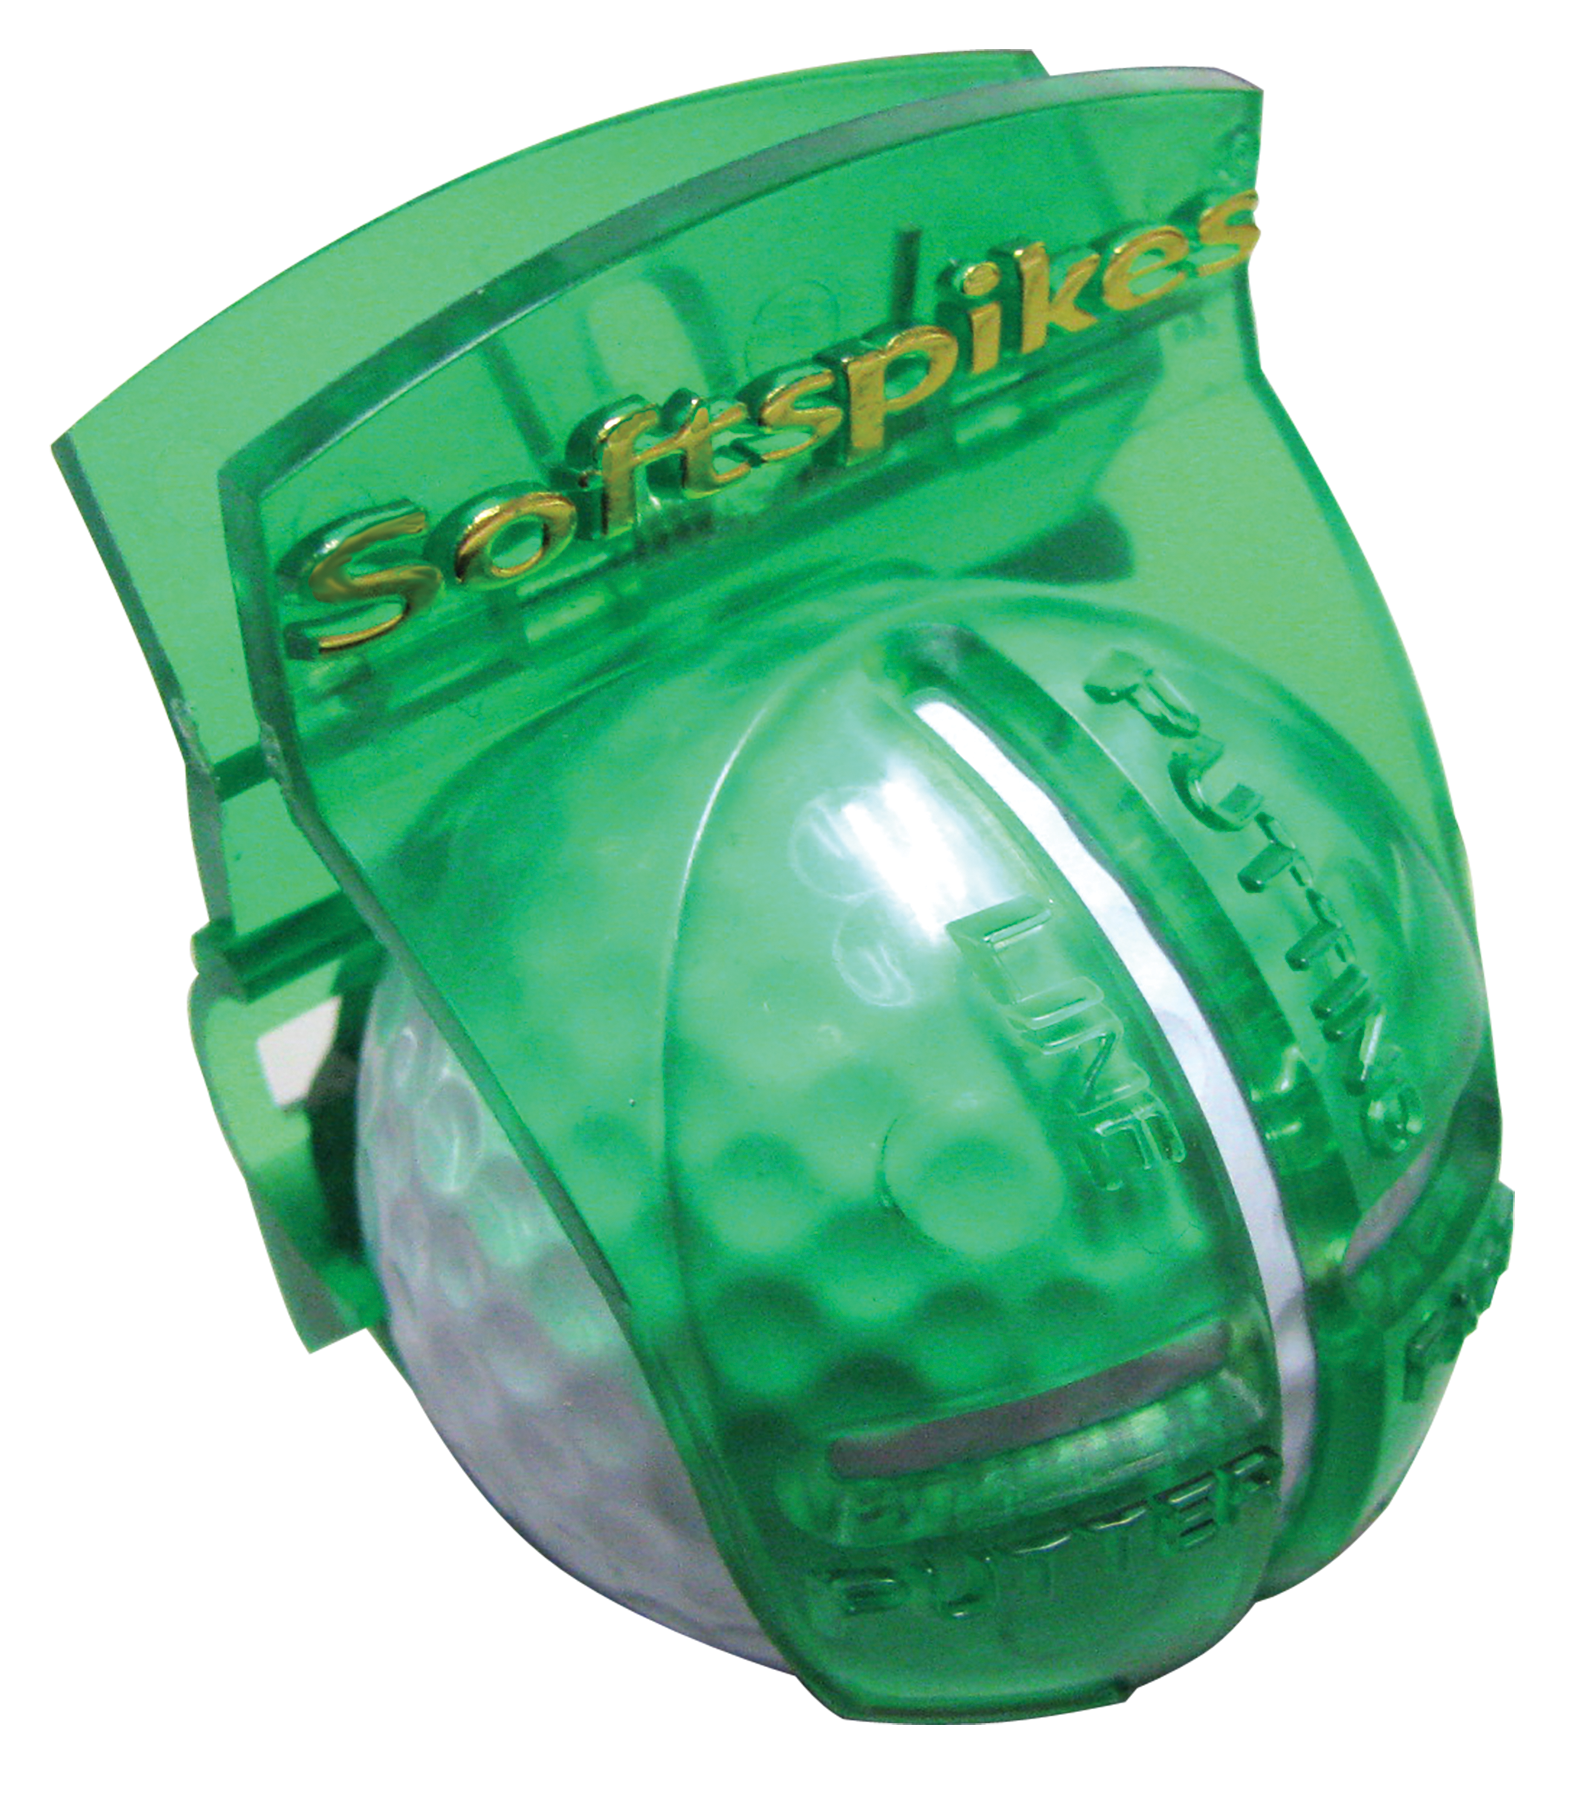 Softspikes® Golf Ball Alignment Tool™